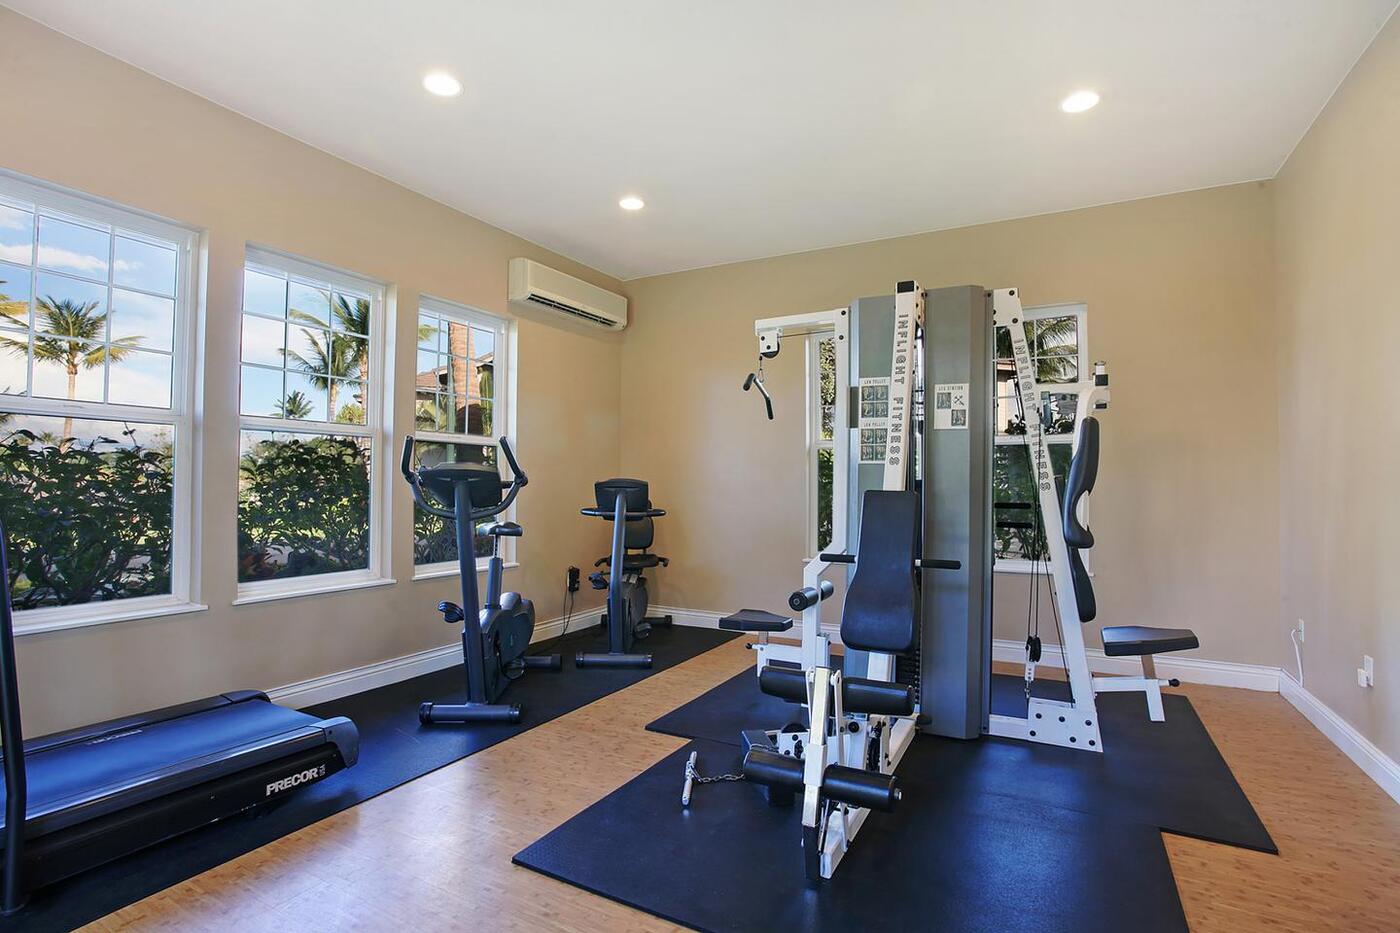 Fitness room with equipment